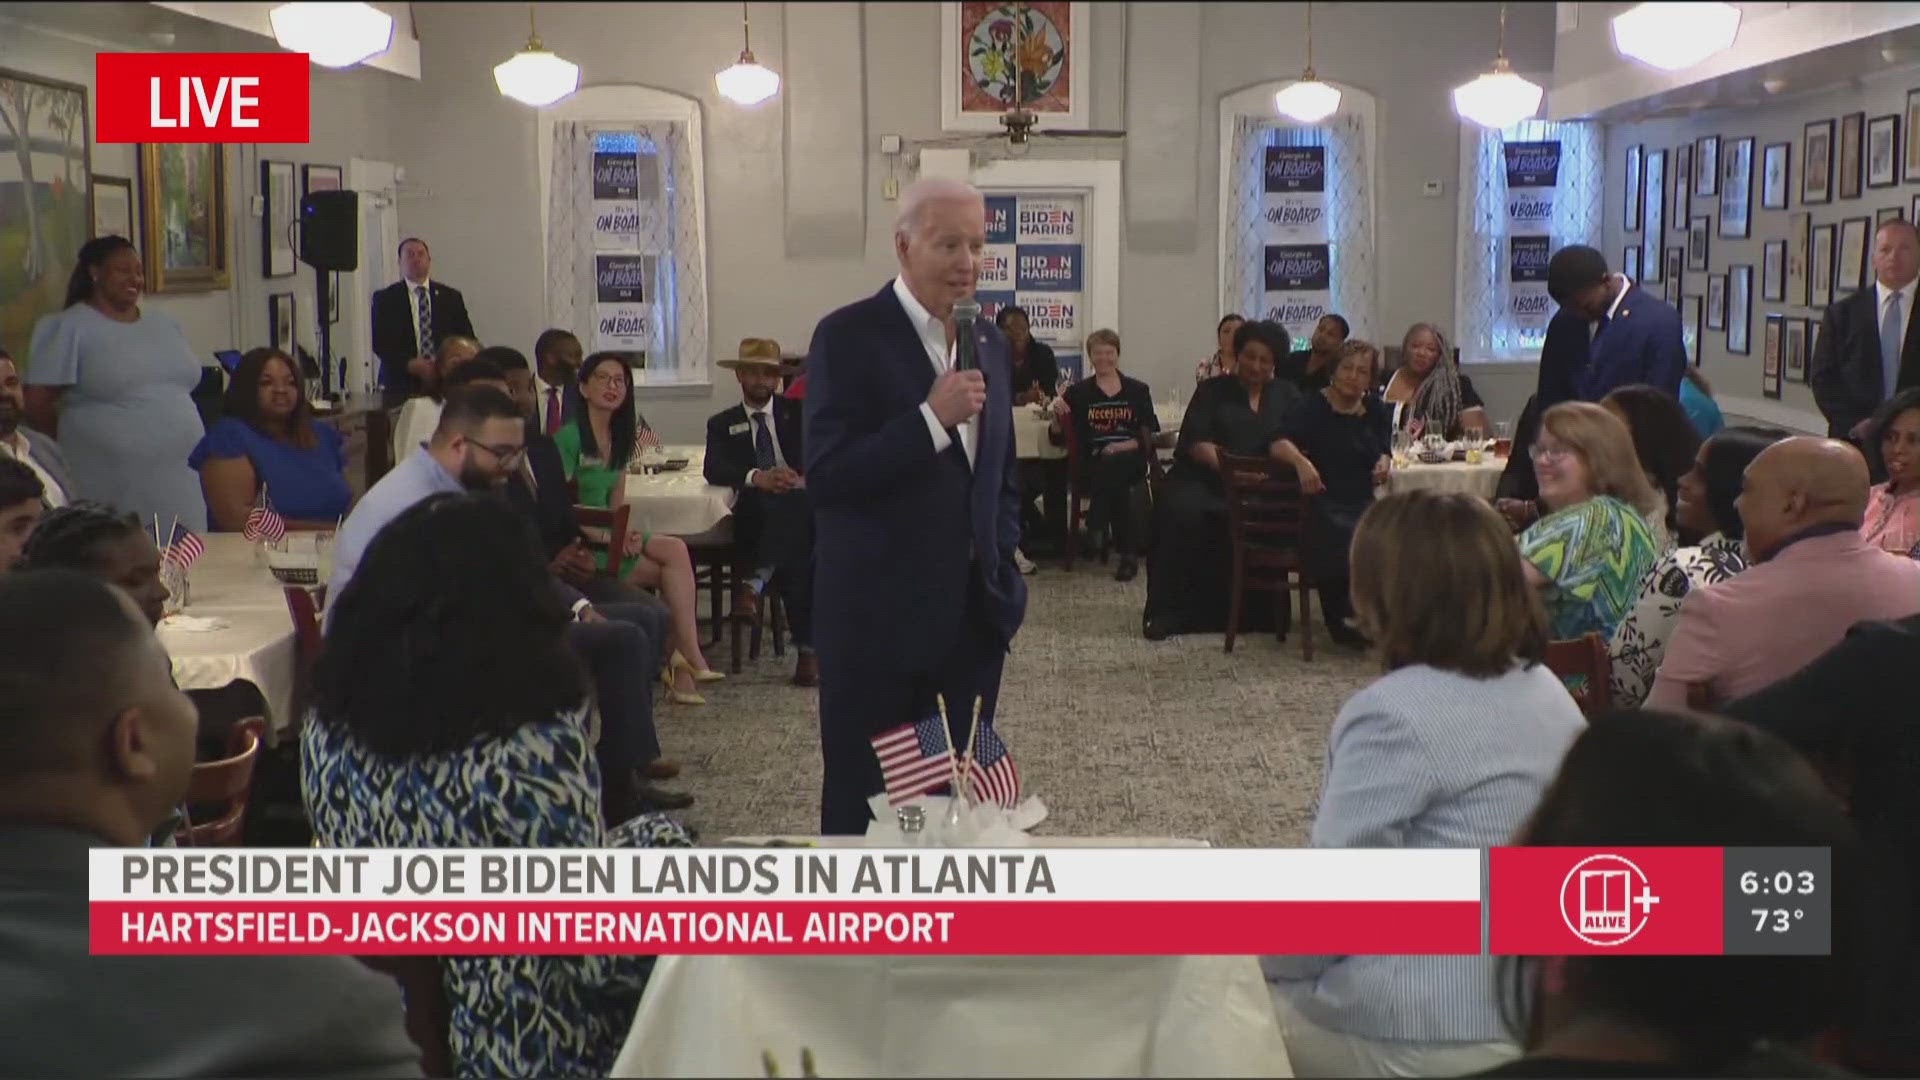 Biden flew into the city on Saturday for a campaign event. He's scheduled to deliver the upcoming commencement speech at Morehouse College on Sunday.